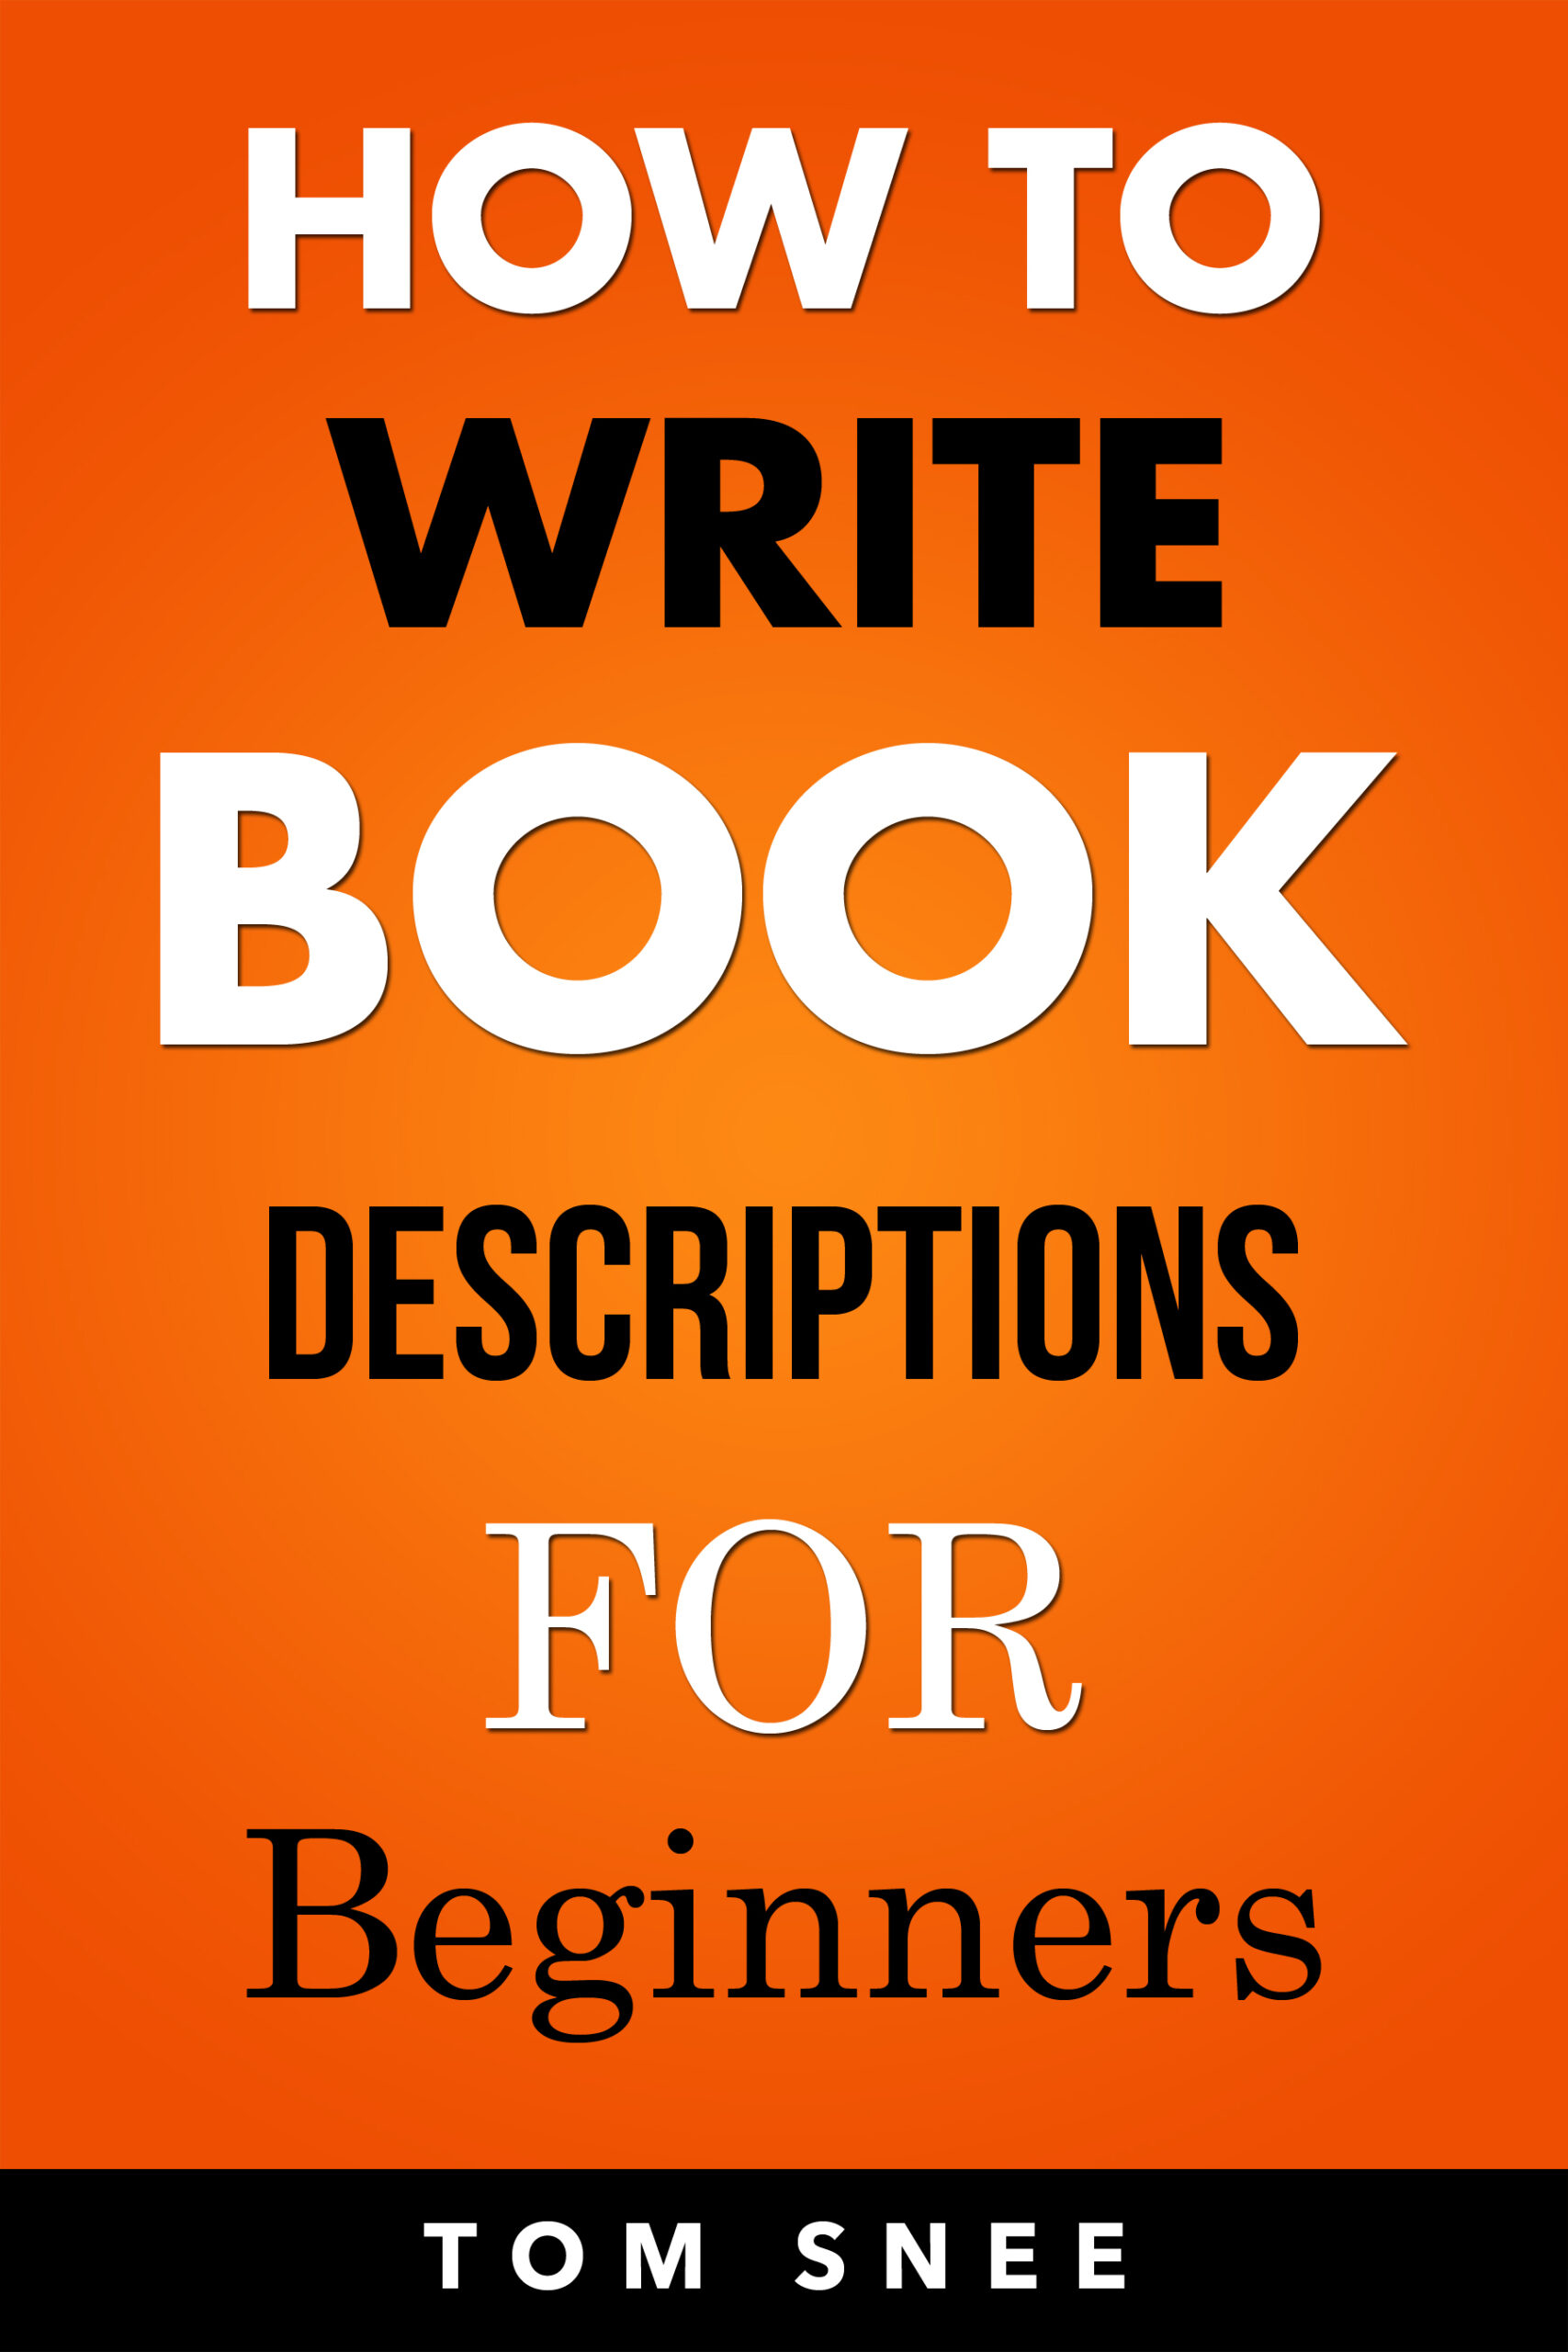 FREE: How to Write Book Descriptions for Beginners by by Tom Snee